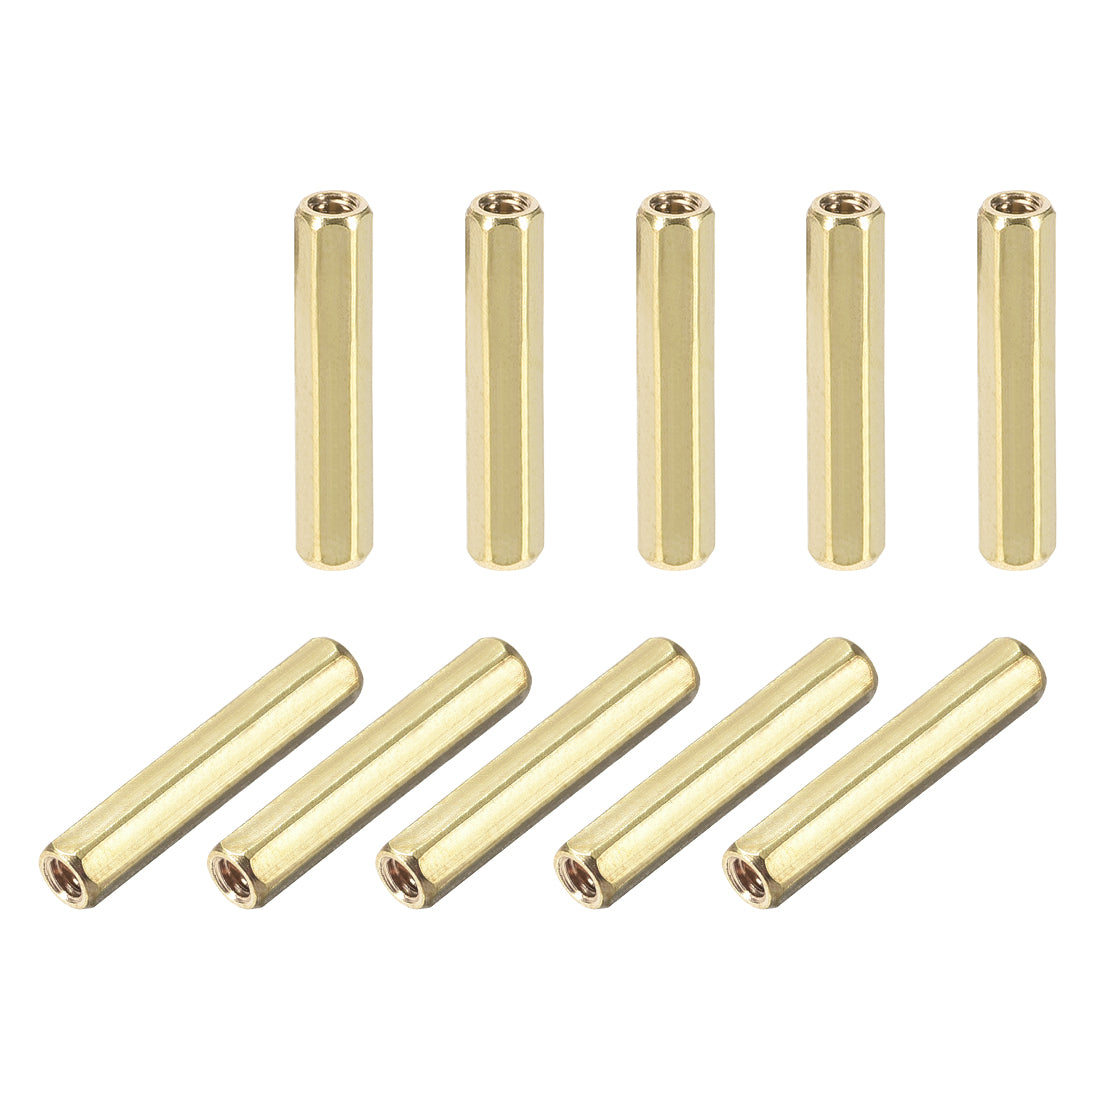 Uxcell Uxcell M2 x 25mm Female to Female Hex Brass Spacer Standoff 20pcs